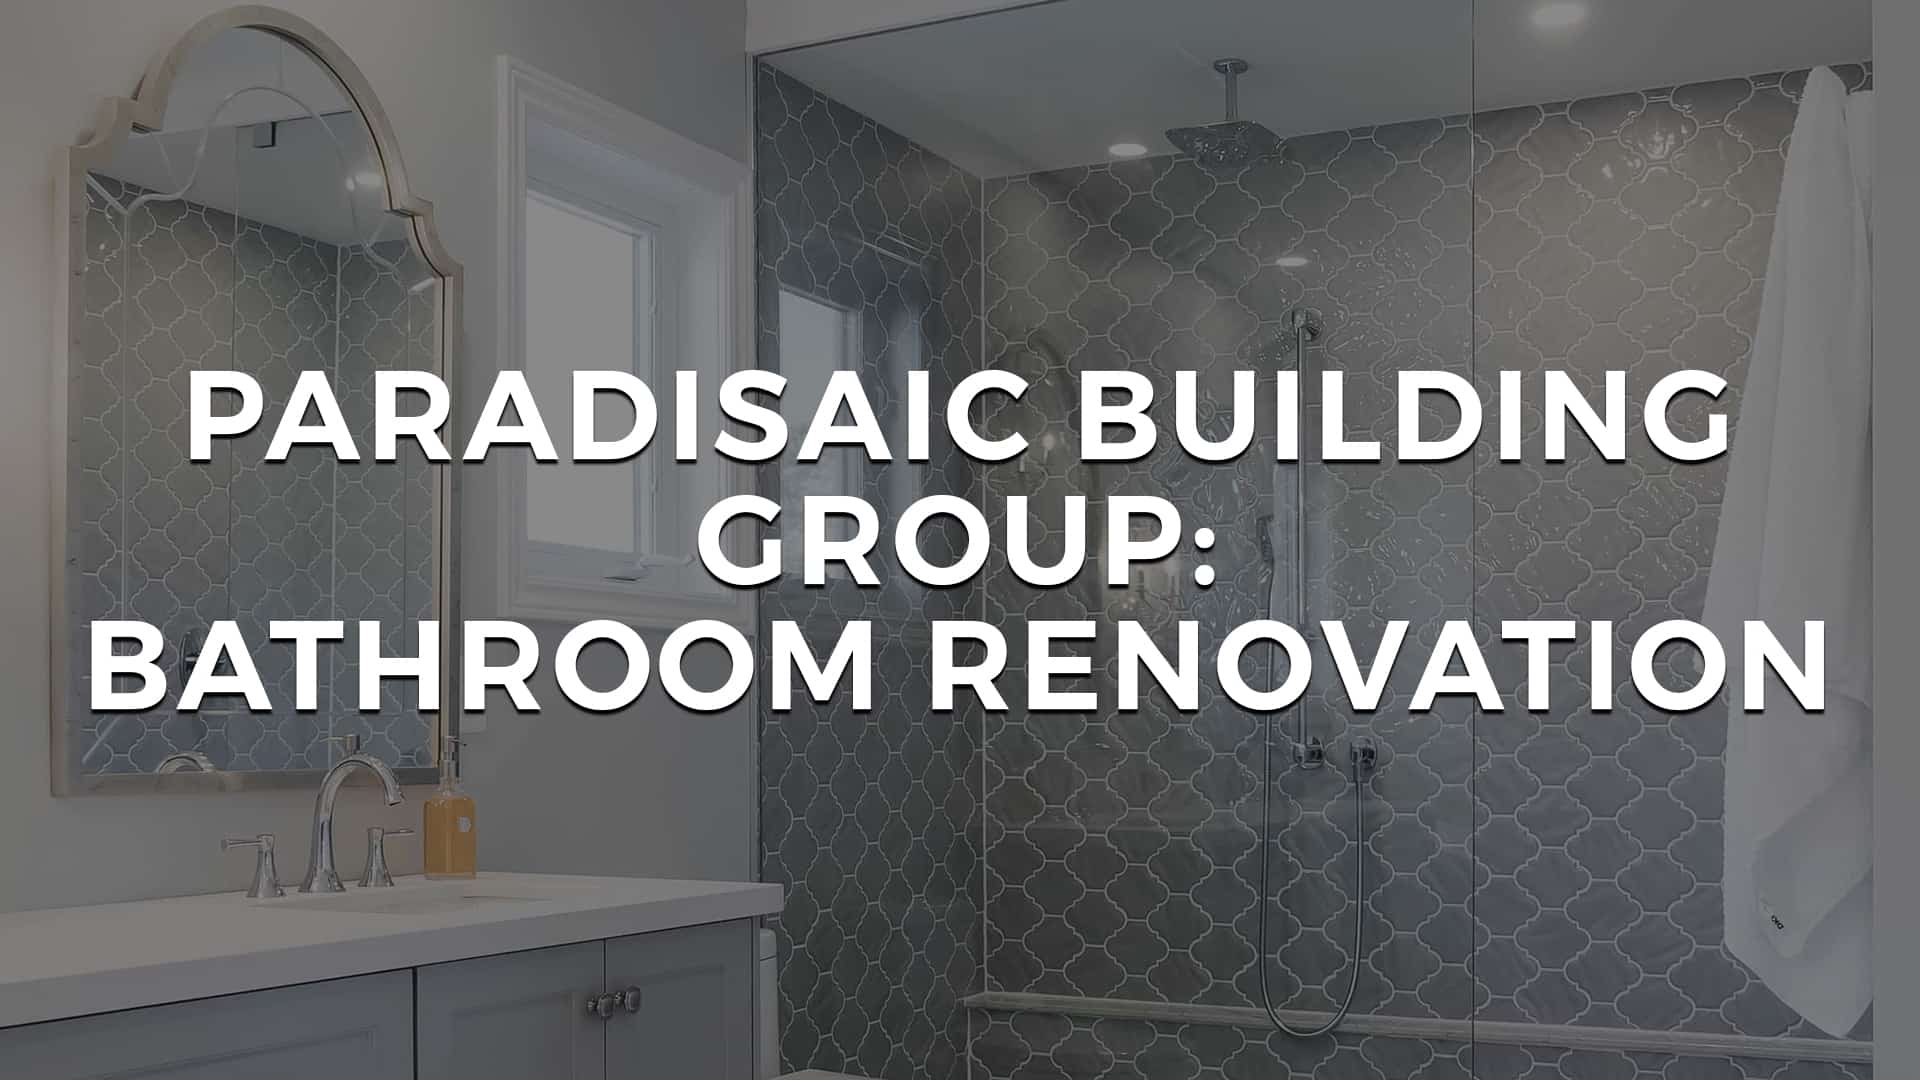 You are currently viewing Paradisaic Building Group Bathroom Renovation